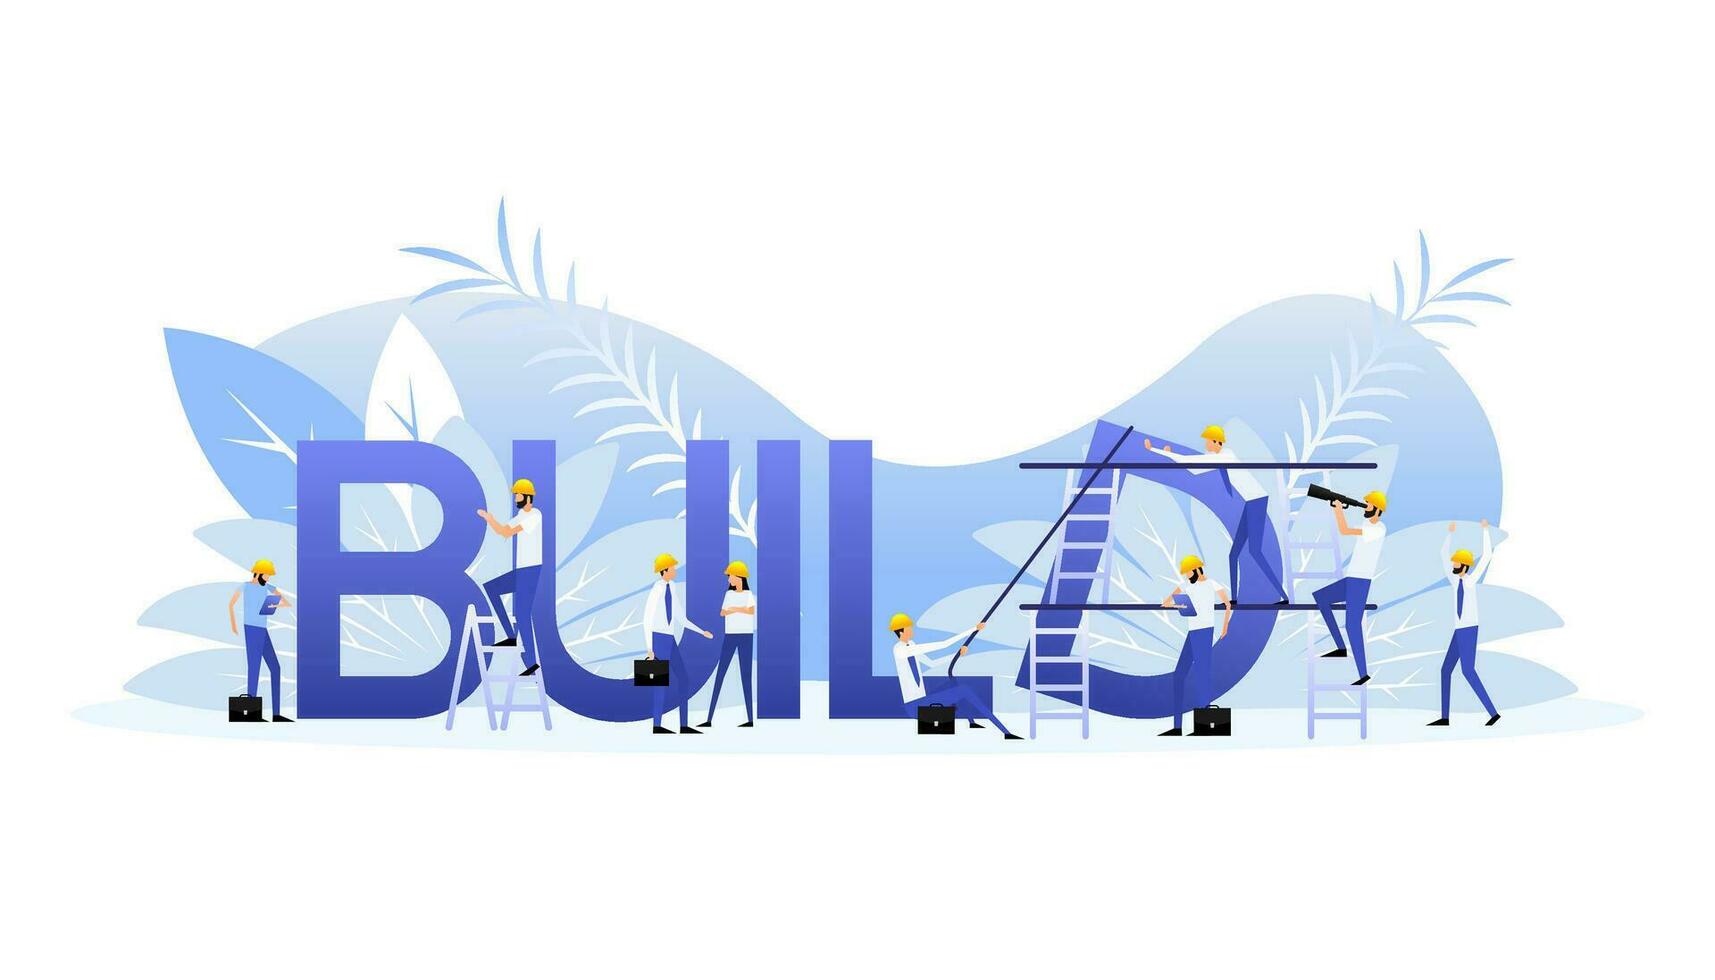 Build people, great design for any purposes. Teamwork business success. Web design isometric concept vector